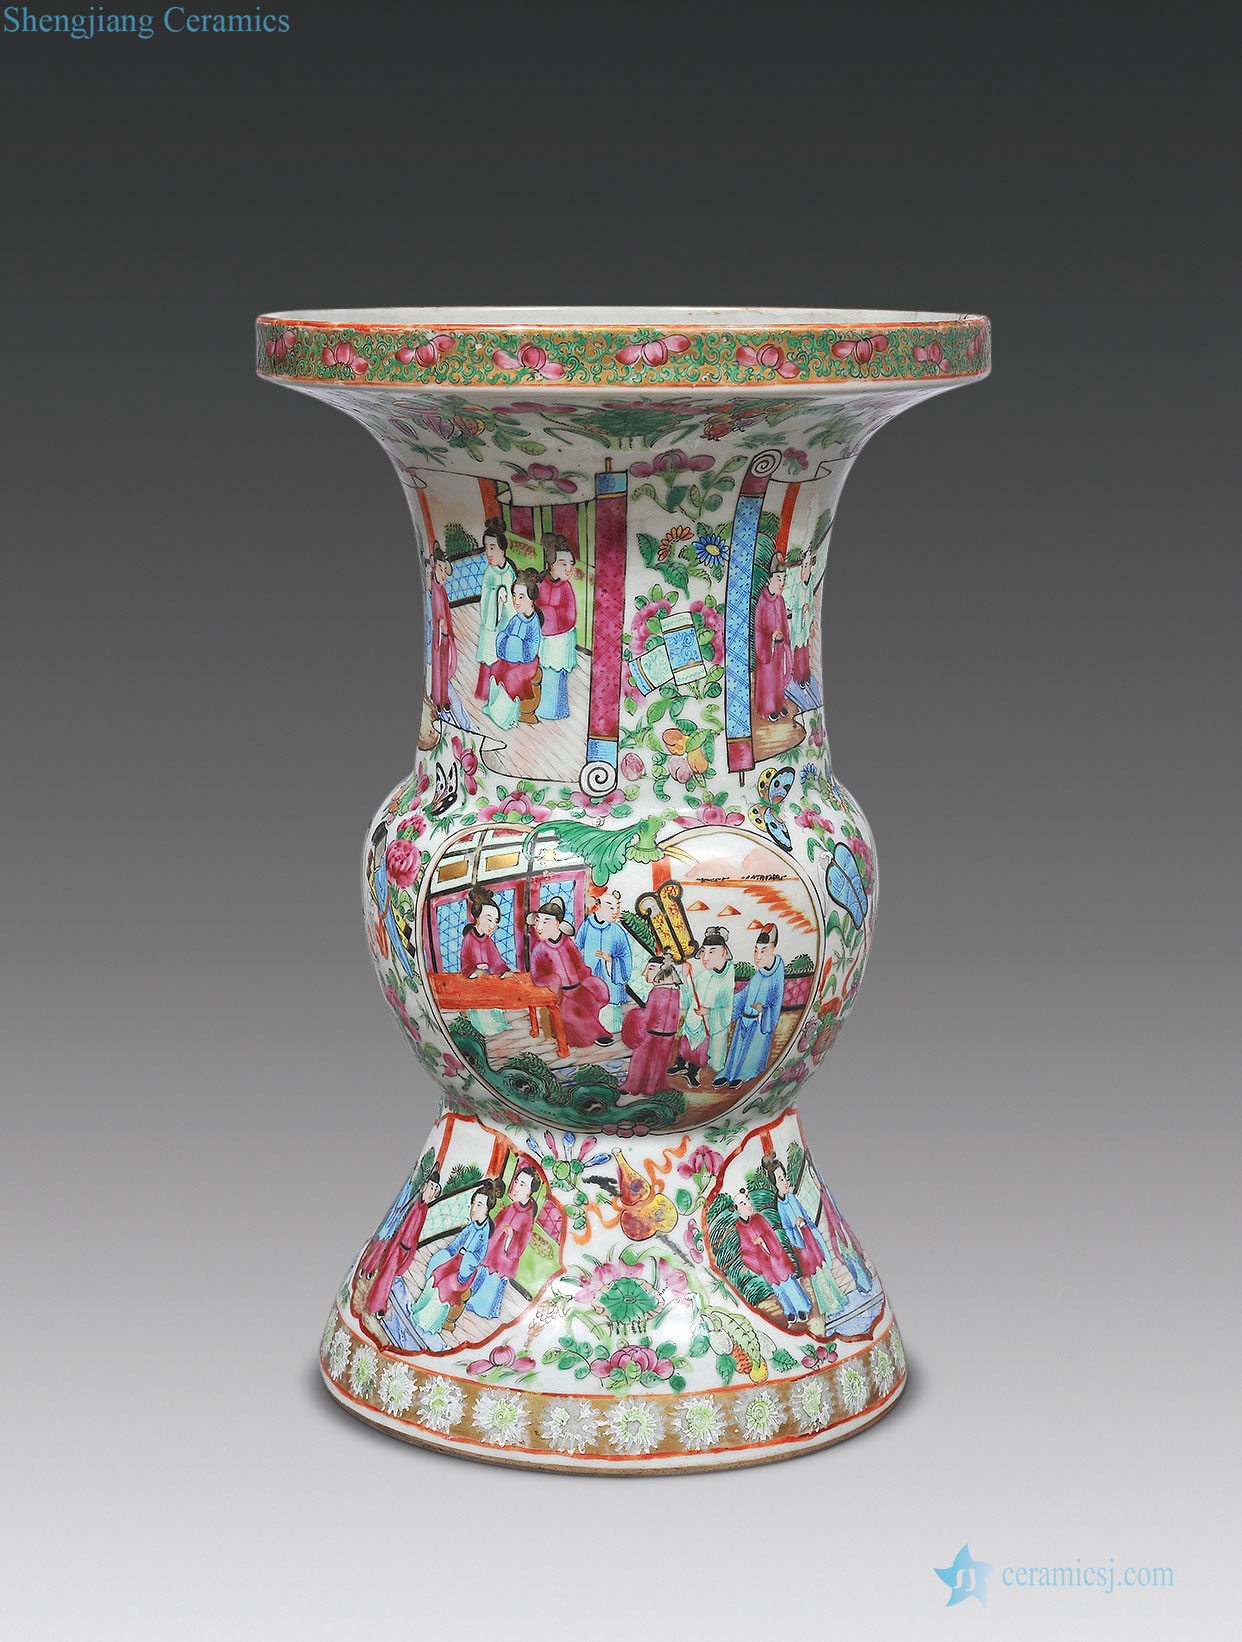 In late qing dynasty Grain flower vase with wide decorated butterfly medallion characters